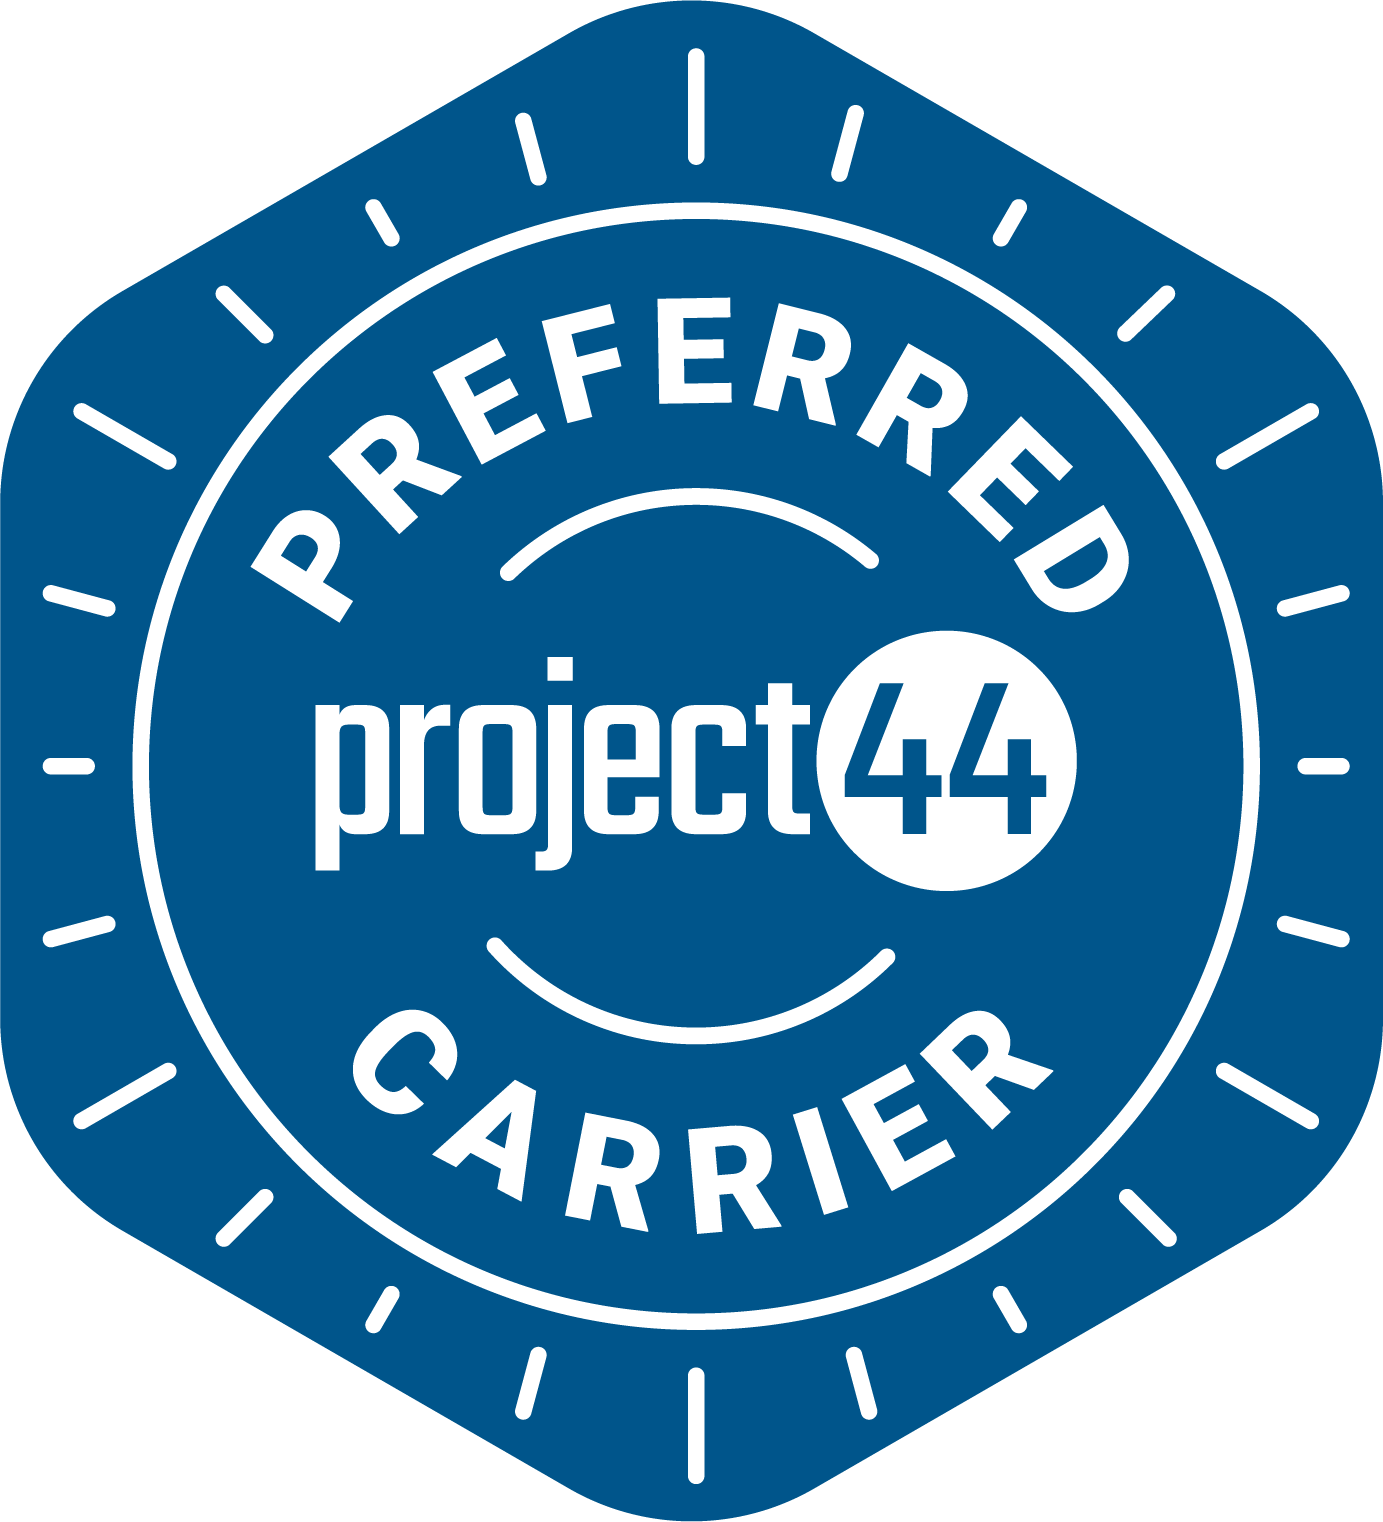 Project44 preferred carrier badge